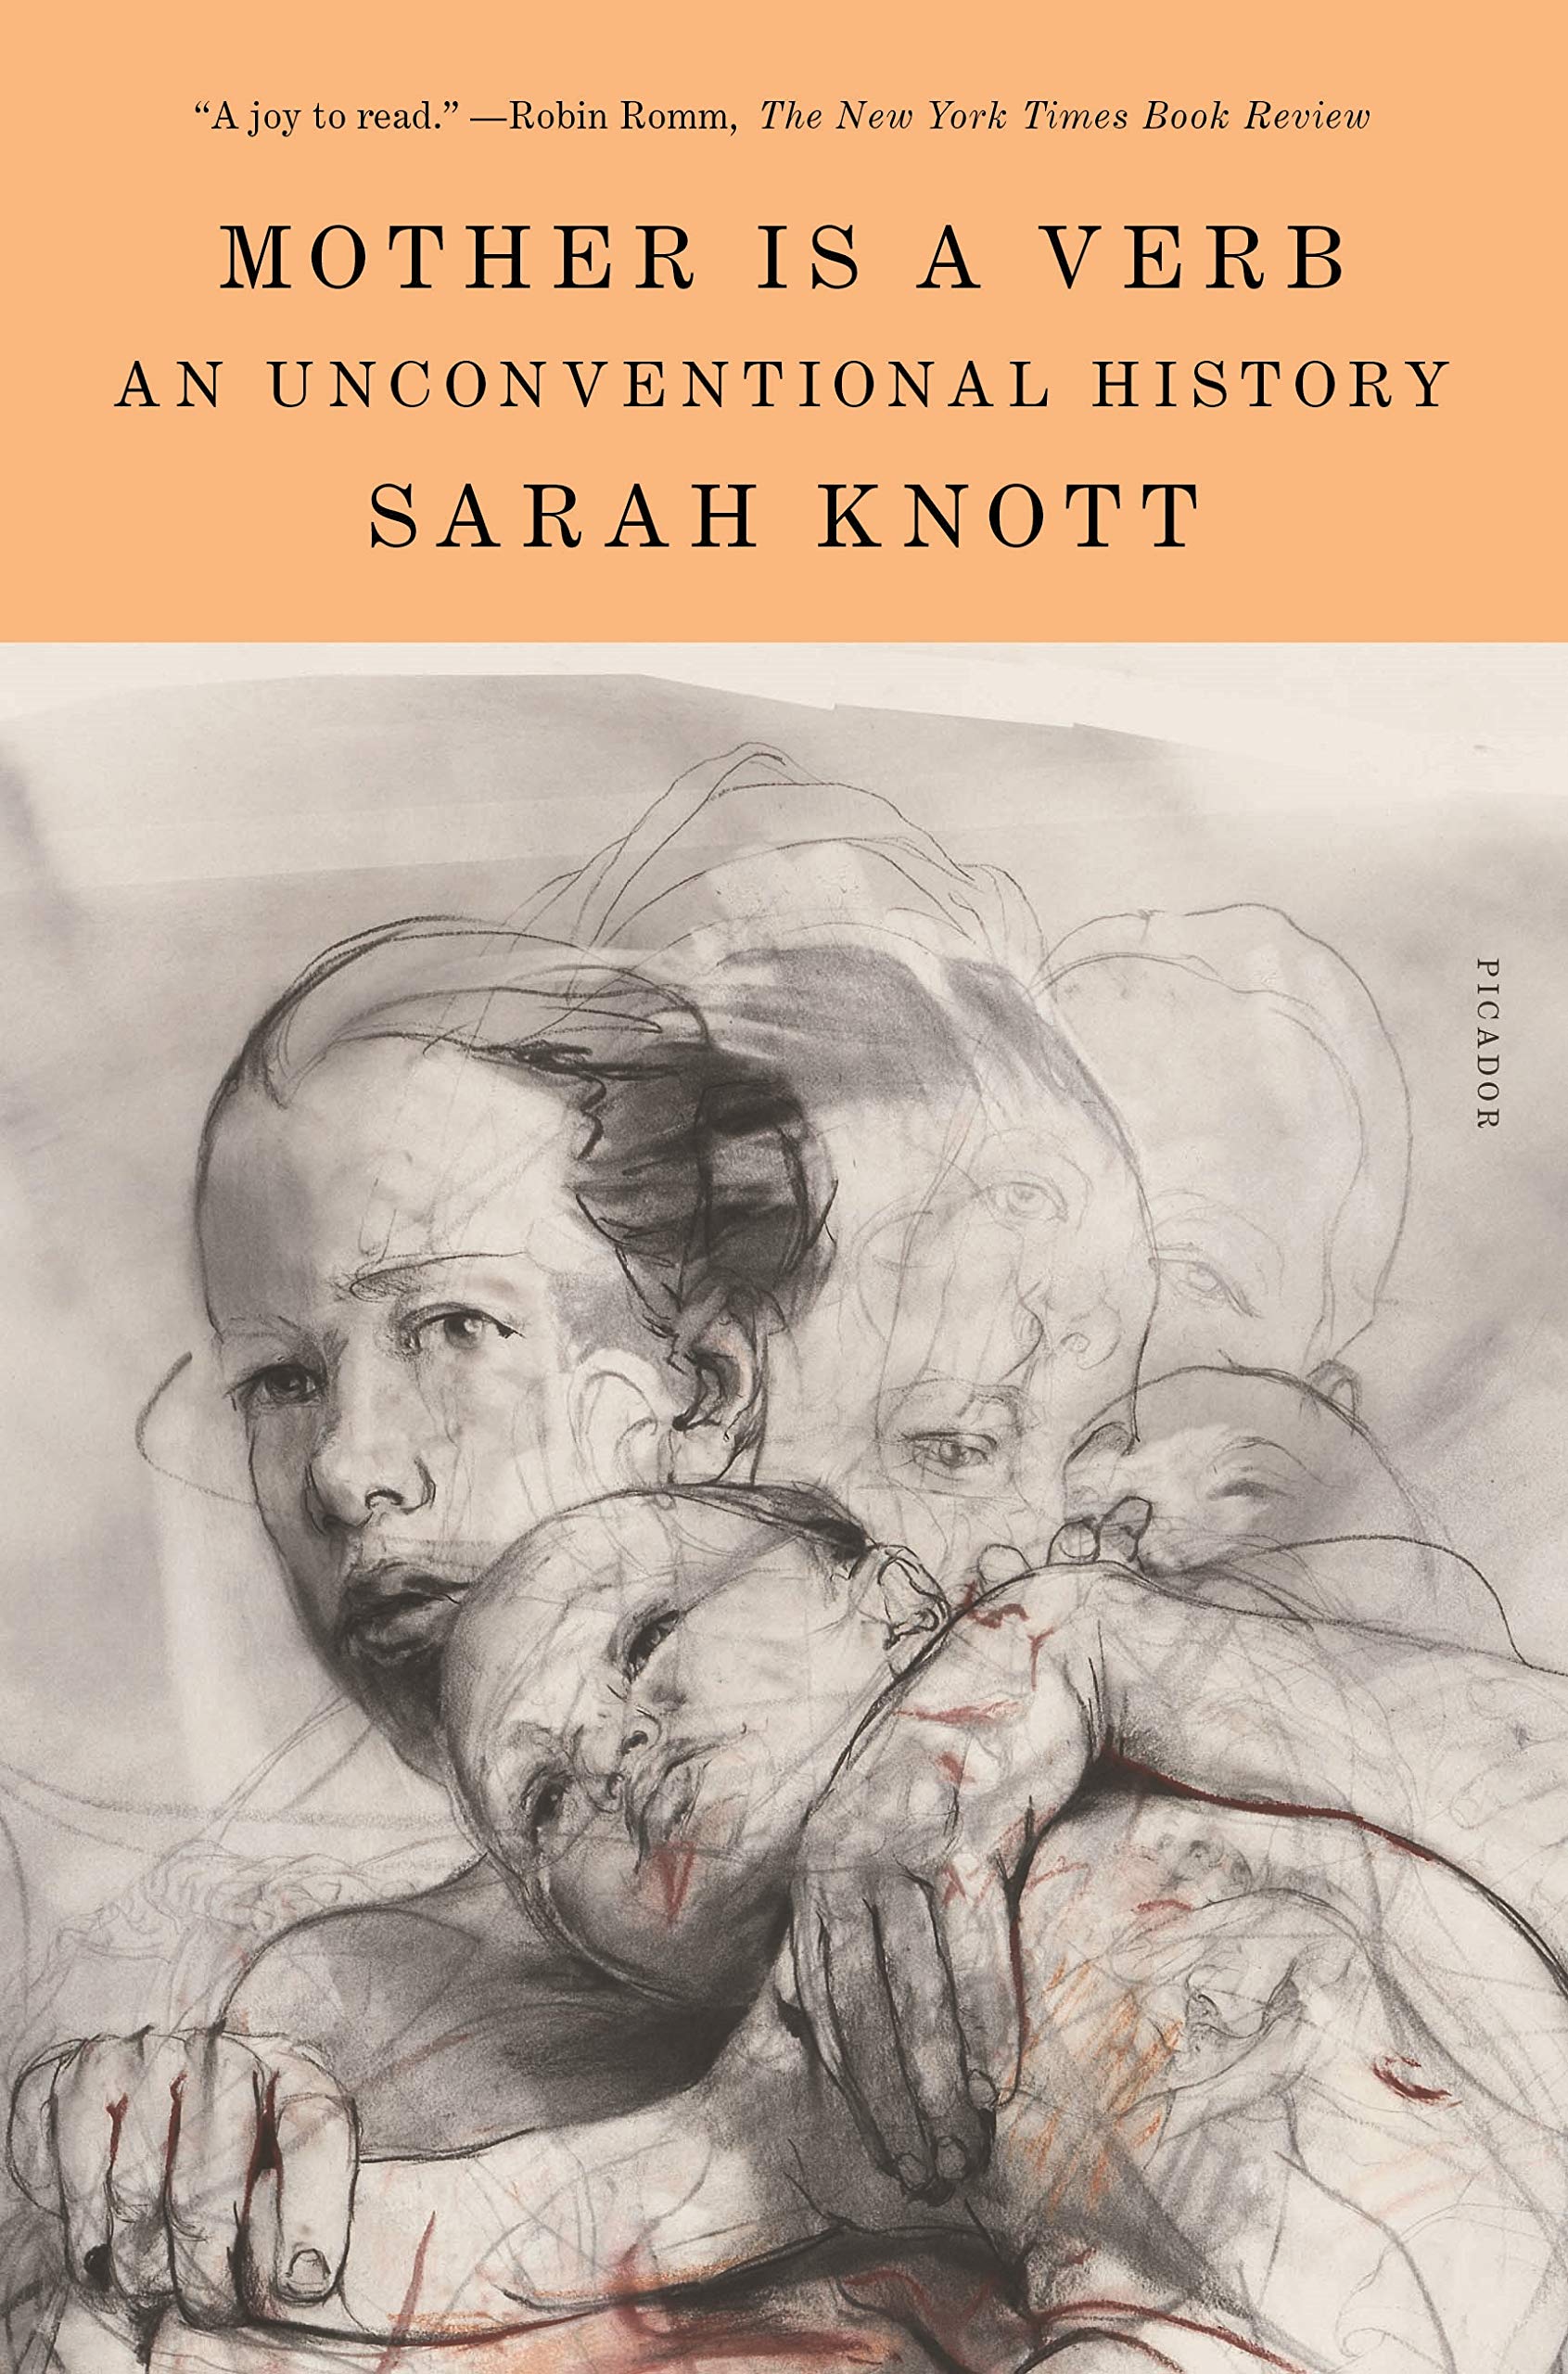 Mother Is a Verb: An Unconventional History | Sarah Knott image